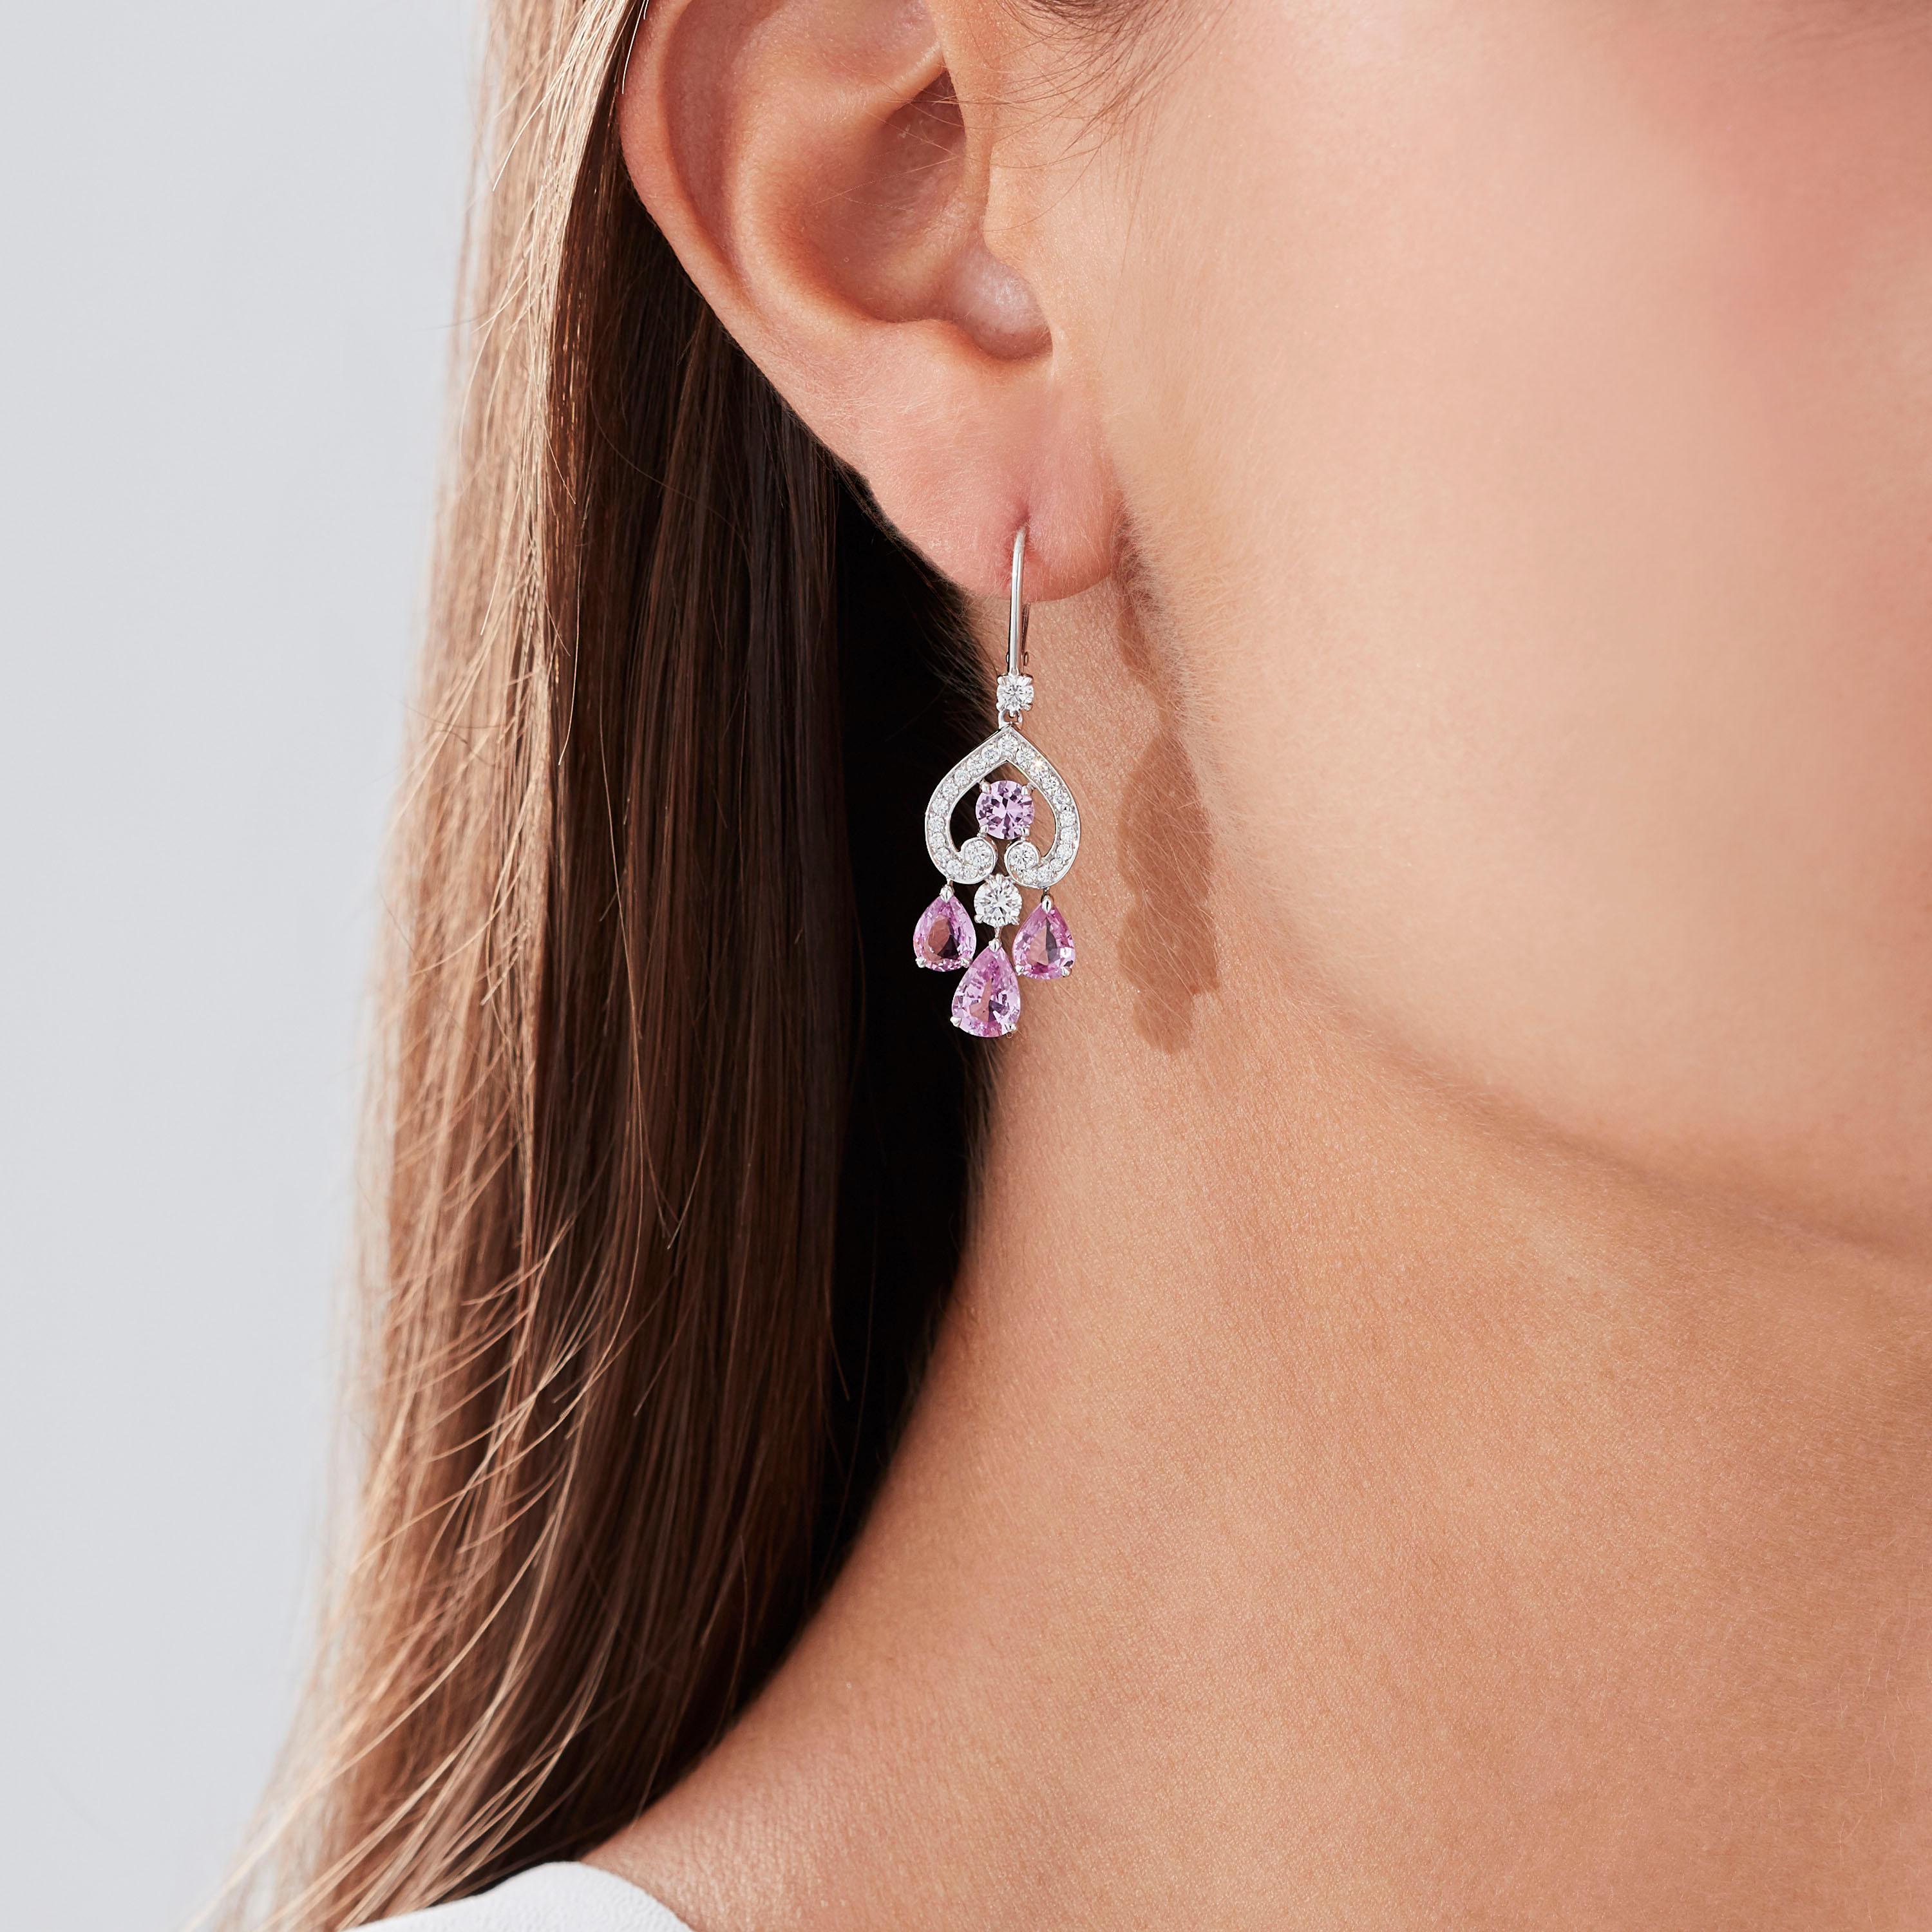 A House of Garrard pair of 18 karat white gold drop earrings from the 'Regal Cascade' collection, set with round white diamonds and round and pearshape pink sapphires.

50 round white diamonds weighing: 0.88cts
8 pink sapphires weighing: